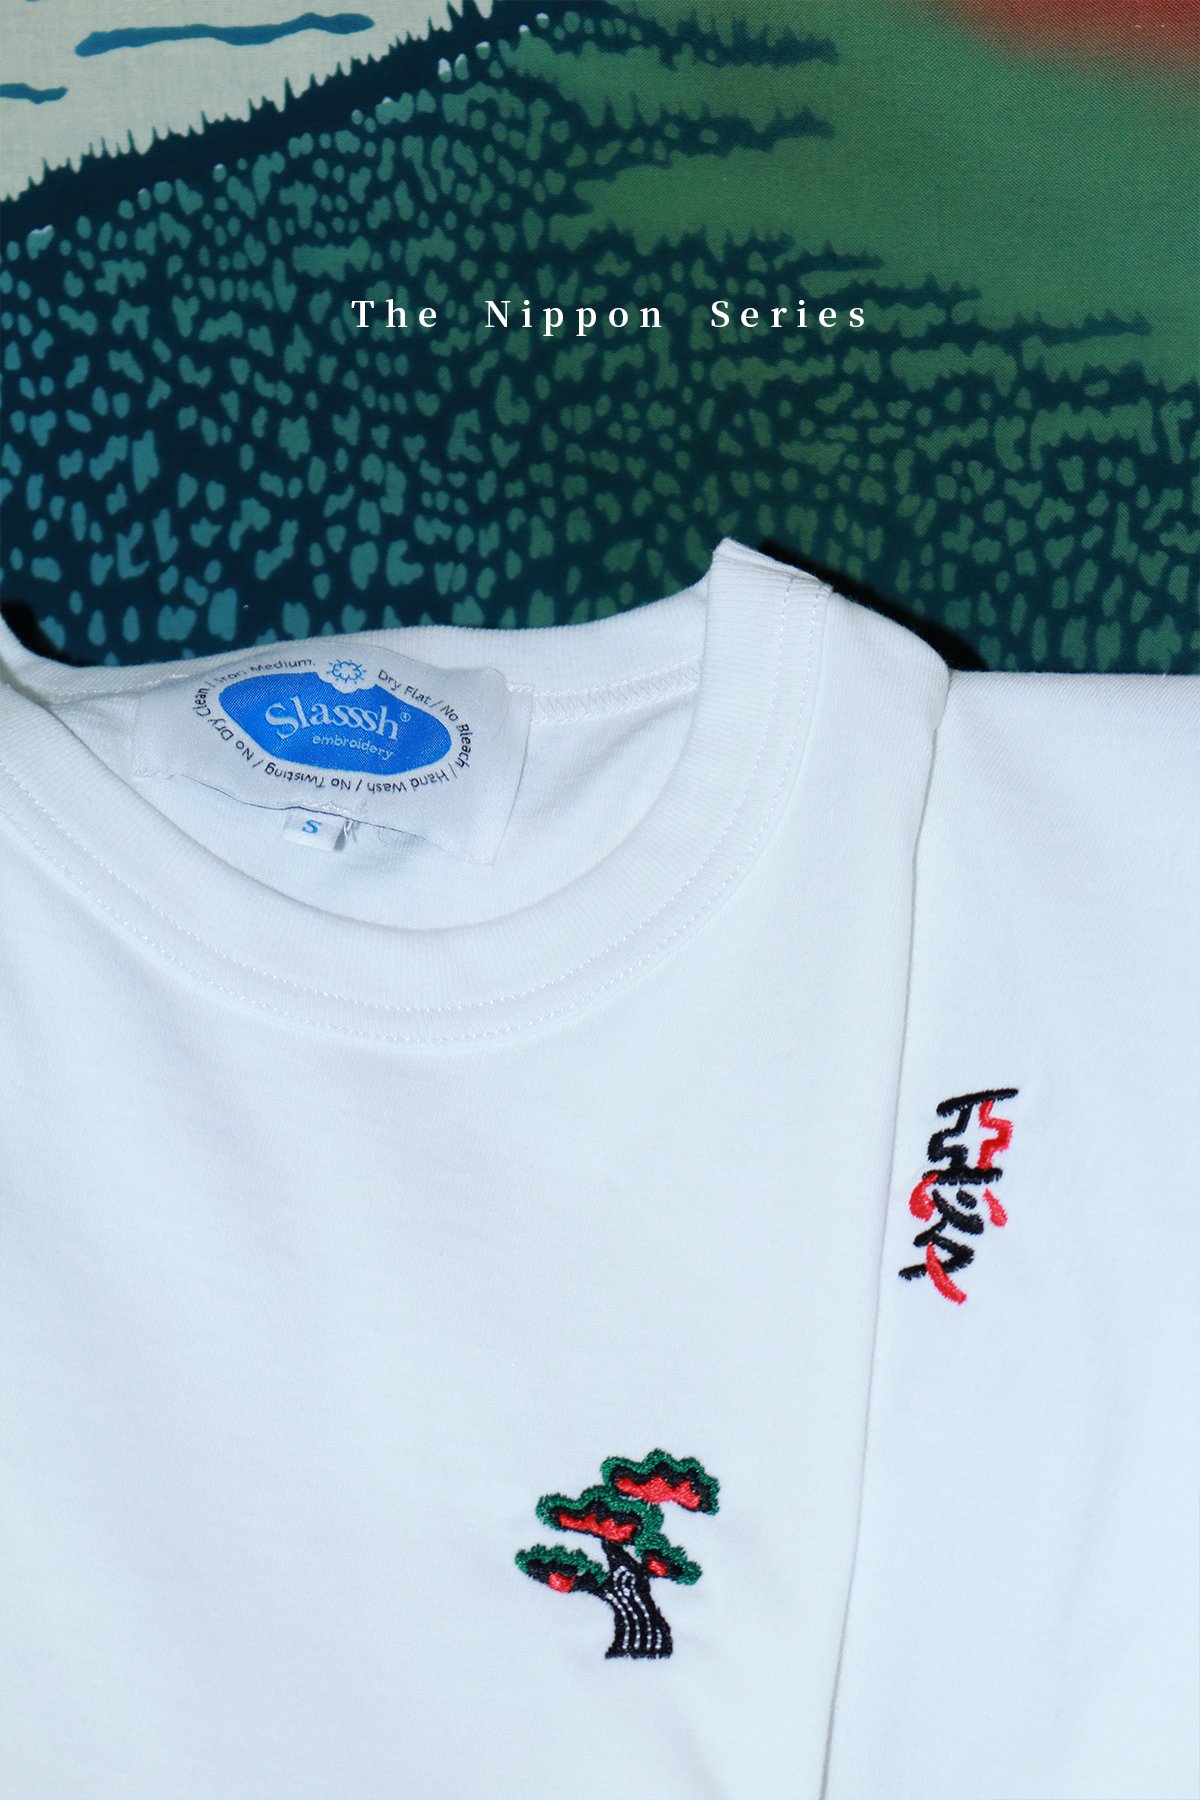 Graphic Embroidery Tee - The Nippon Series Embroidery Tee